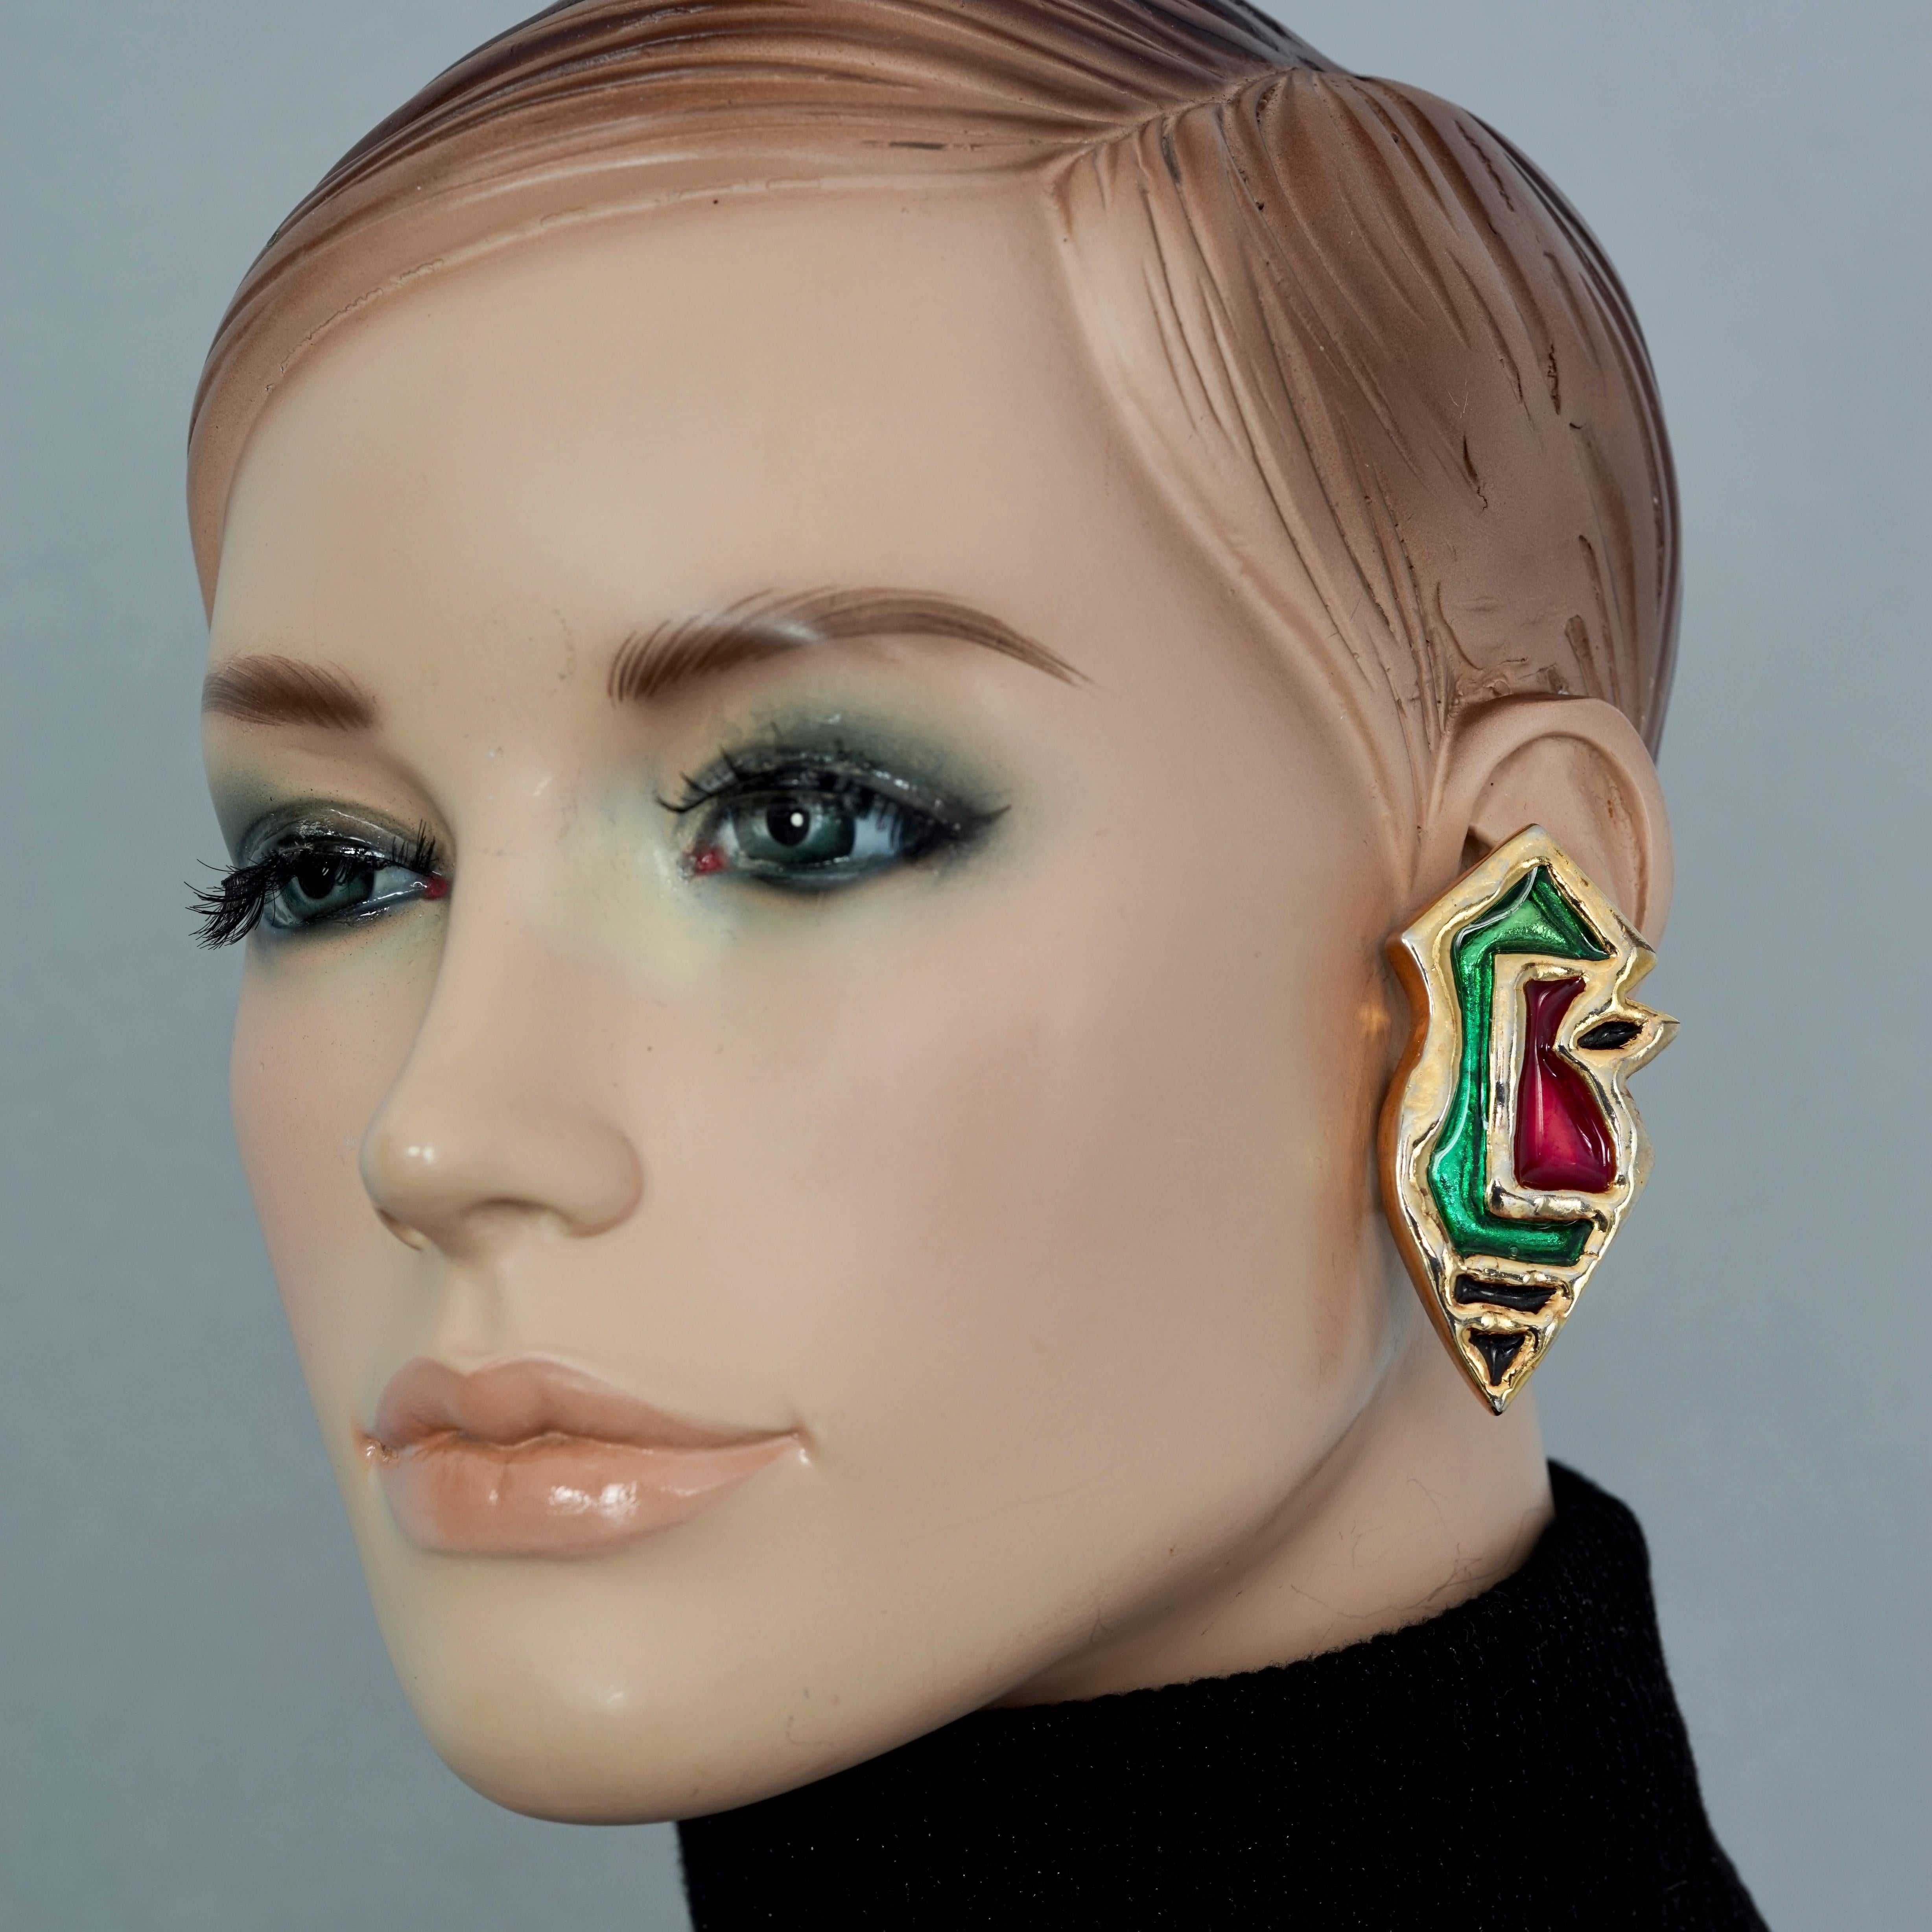 Vintage Massive HANAE MORI PARIS by Billy Boy Enamel Picasso Figural Earrings

Measurements:
Height: 2.55 inches (6.5 cm)
Width: 1.25 inches (3.2 cm)
Weight per Earring: 17 grams

Features:
- 100% Authentic HANAE MORI PARIS by Billy Boy.
- Massive